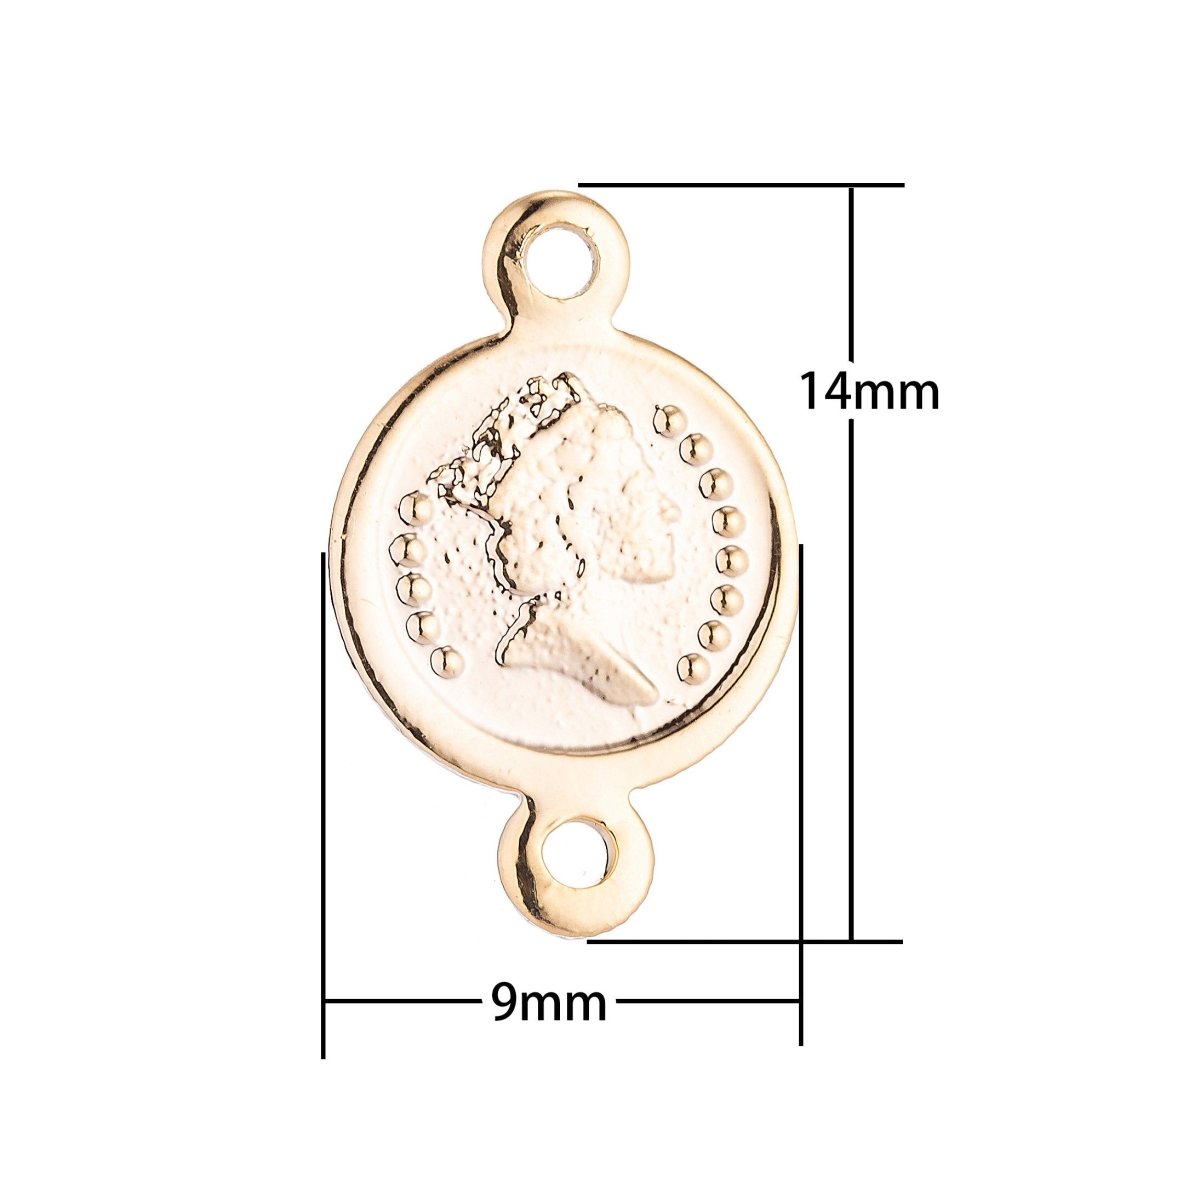 18K Gold Filled Spiritual Religious Queen Elizabeth Medallion Bracelet Charm Bead Finding Connector For Jewelry Making F-018 - DLUXCA